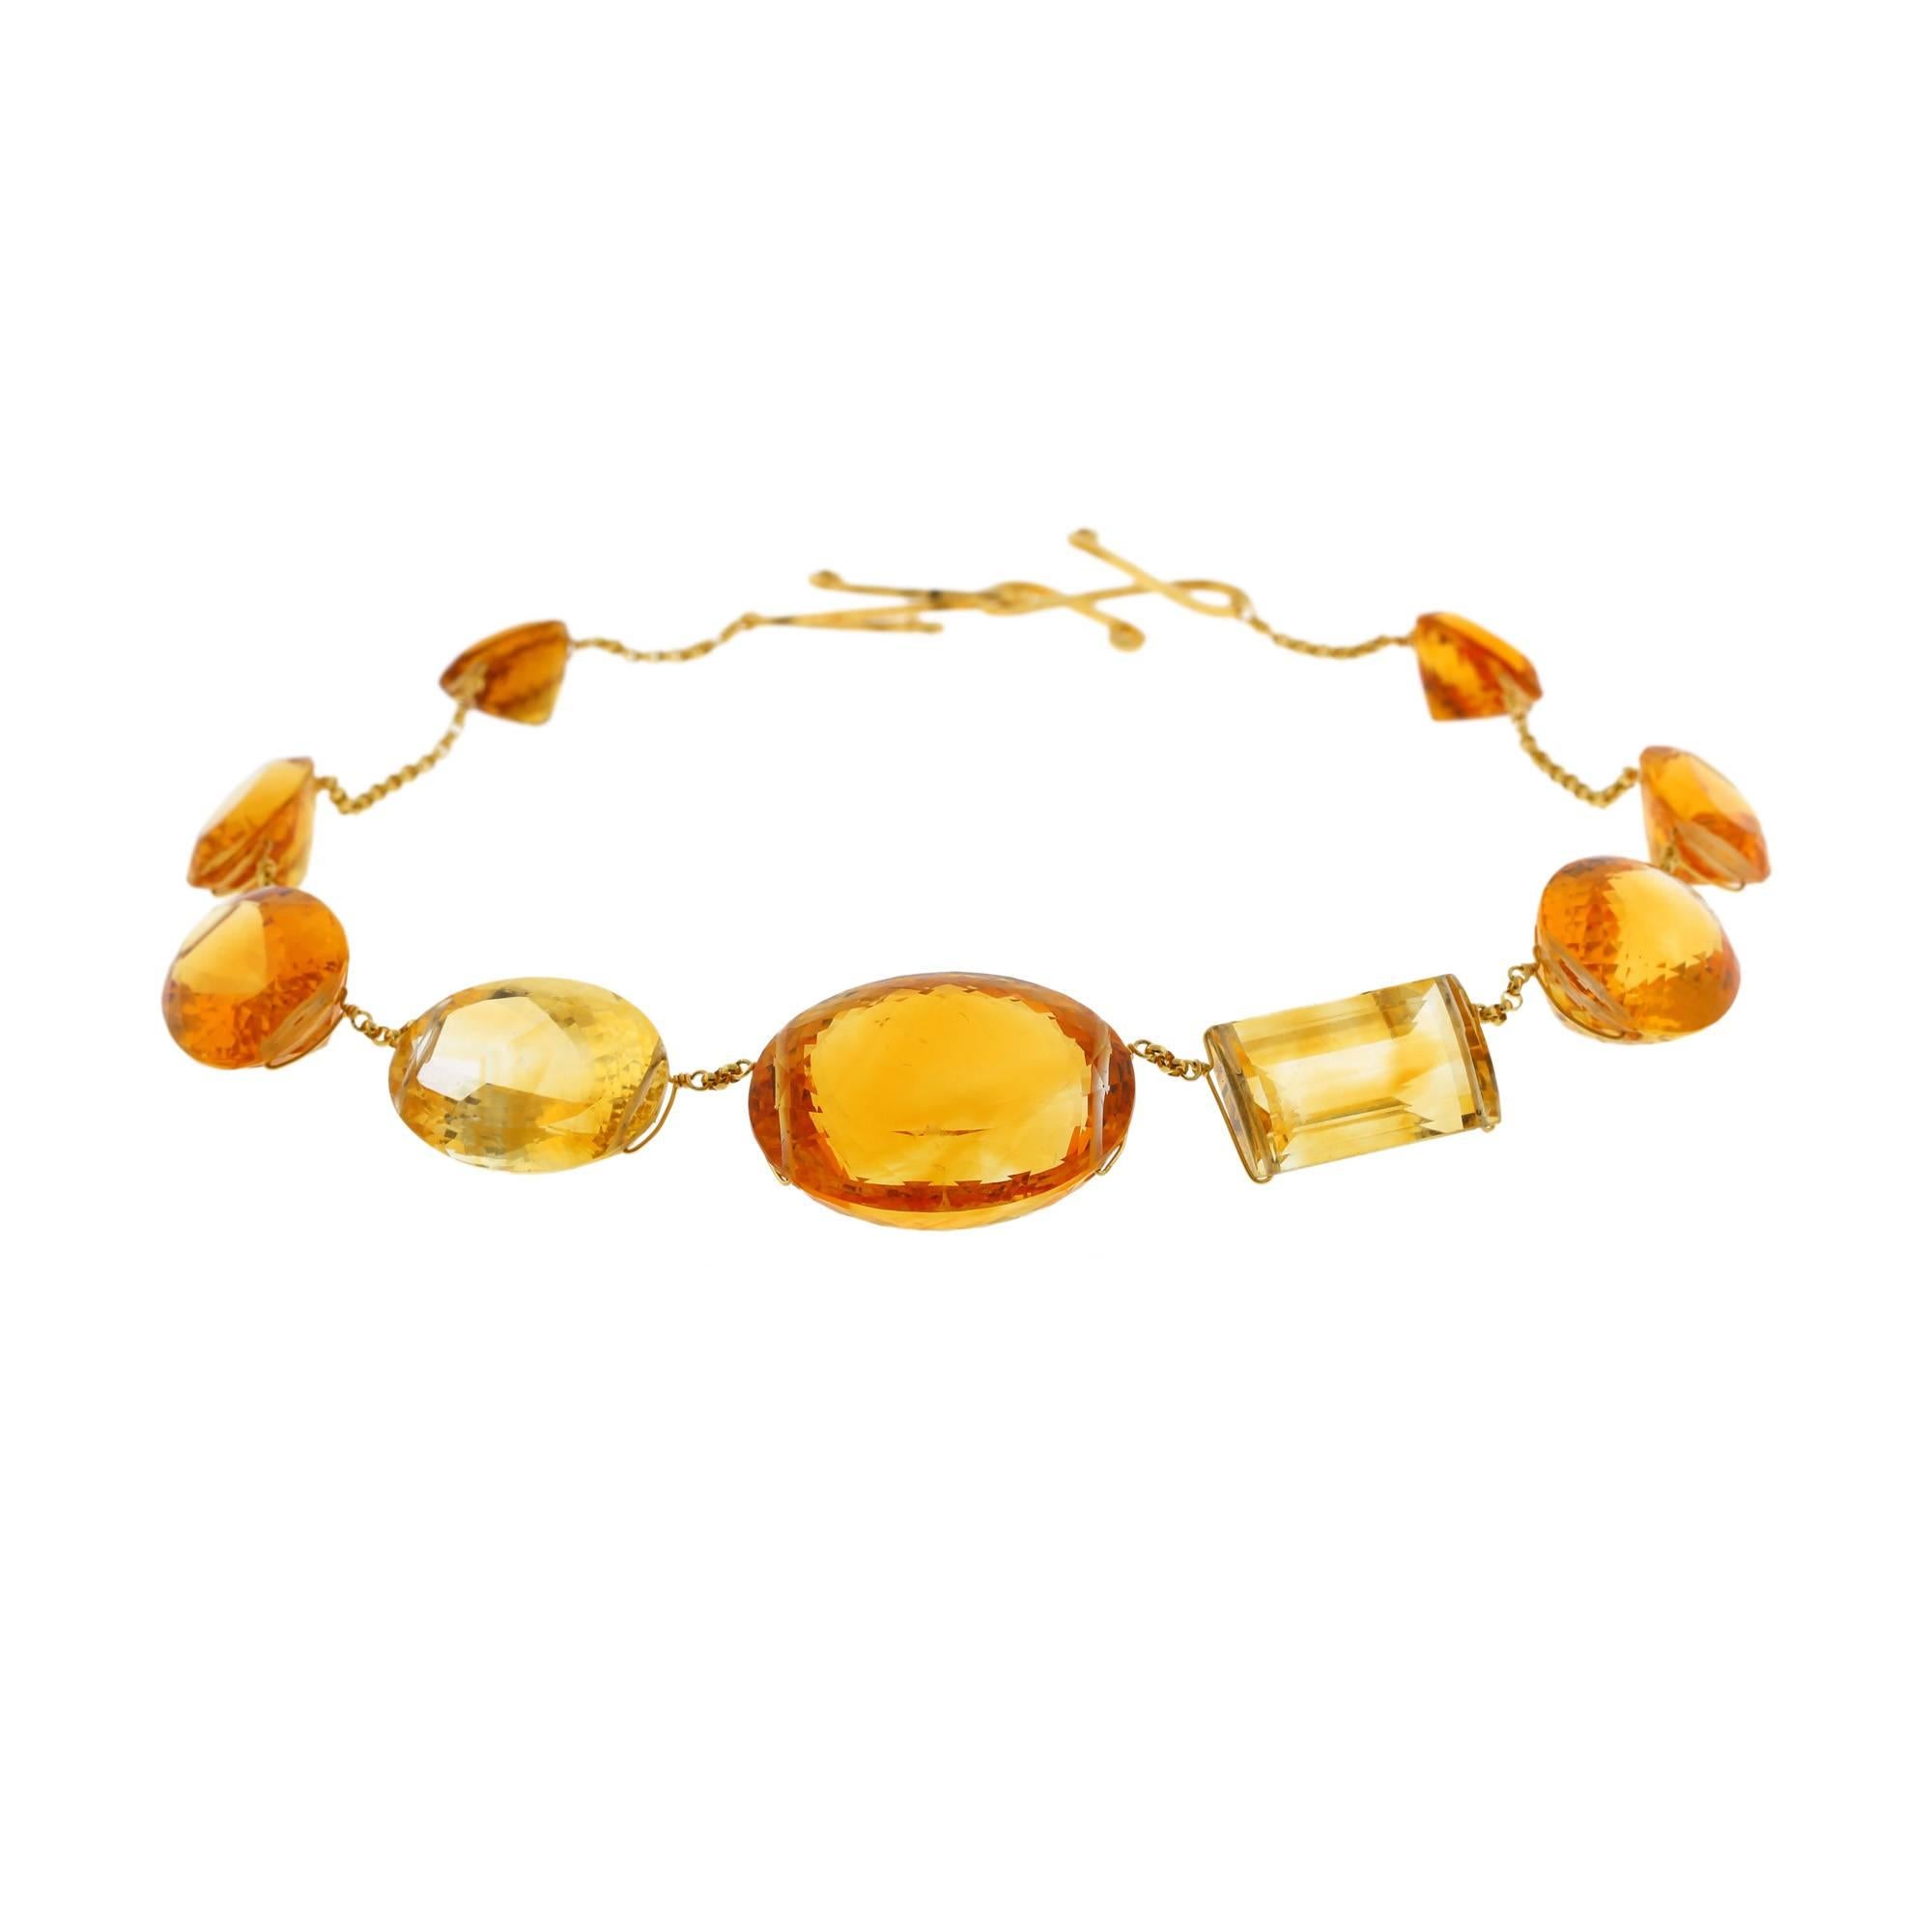 
Every girl should have a necklace of gold to offset her eyes and skin. In this case, a necklace of golden stones.

Citrine in all of its hues is extremely flattering and neutral. This necklace is like sparkling gold that floats around the neck. The